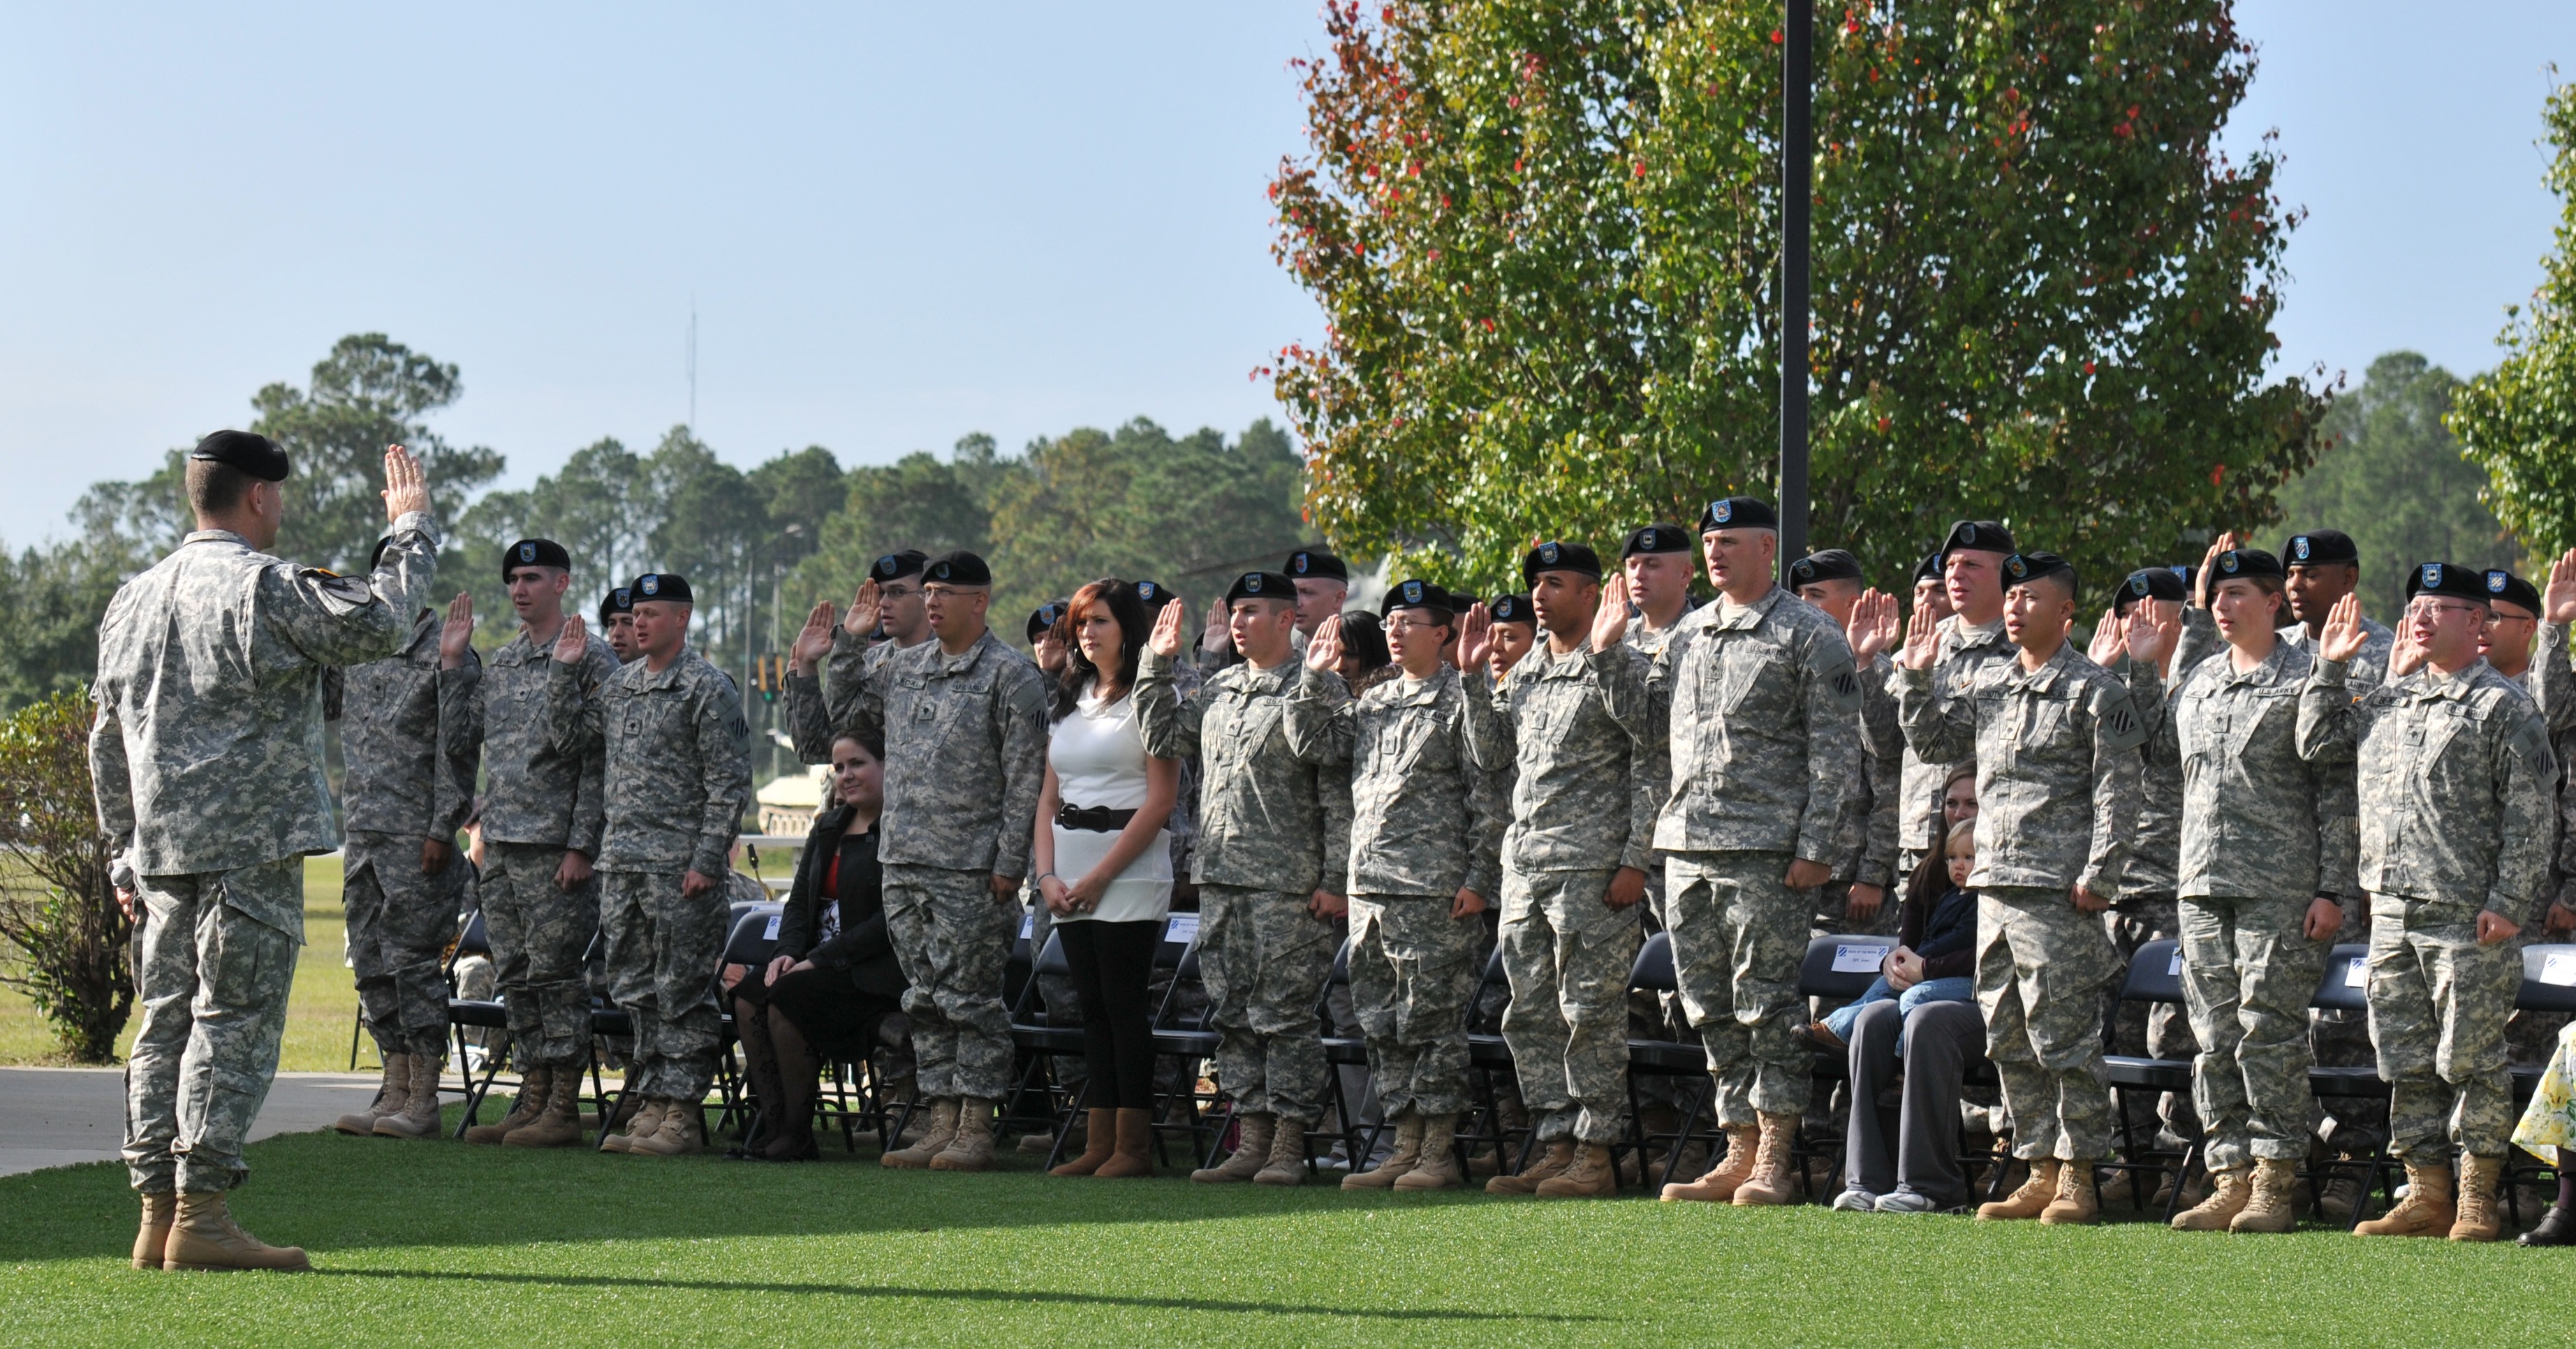 Marne Division hosts 'mass re-enlistment' ceremony | Article | The United States Army3689 x 1932